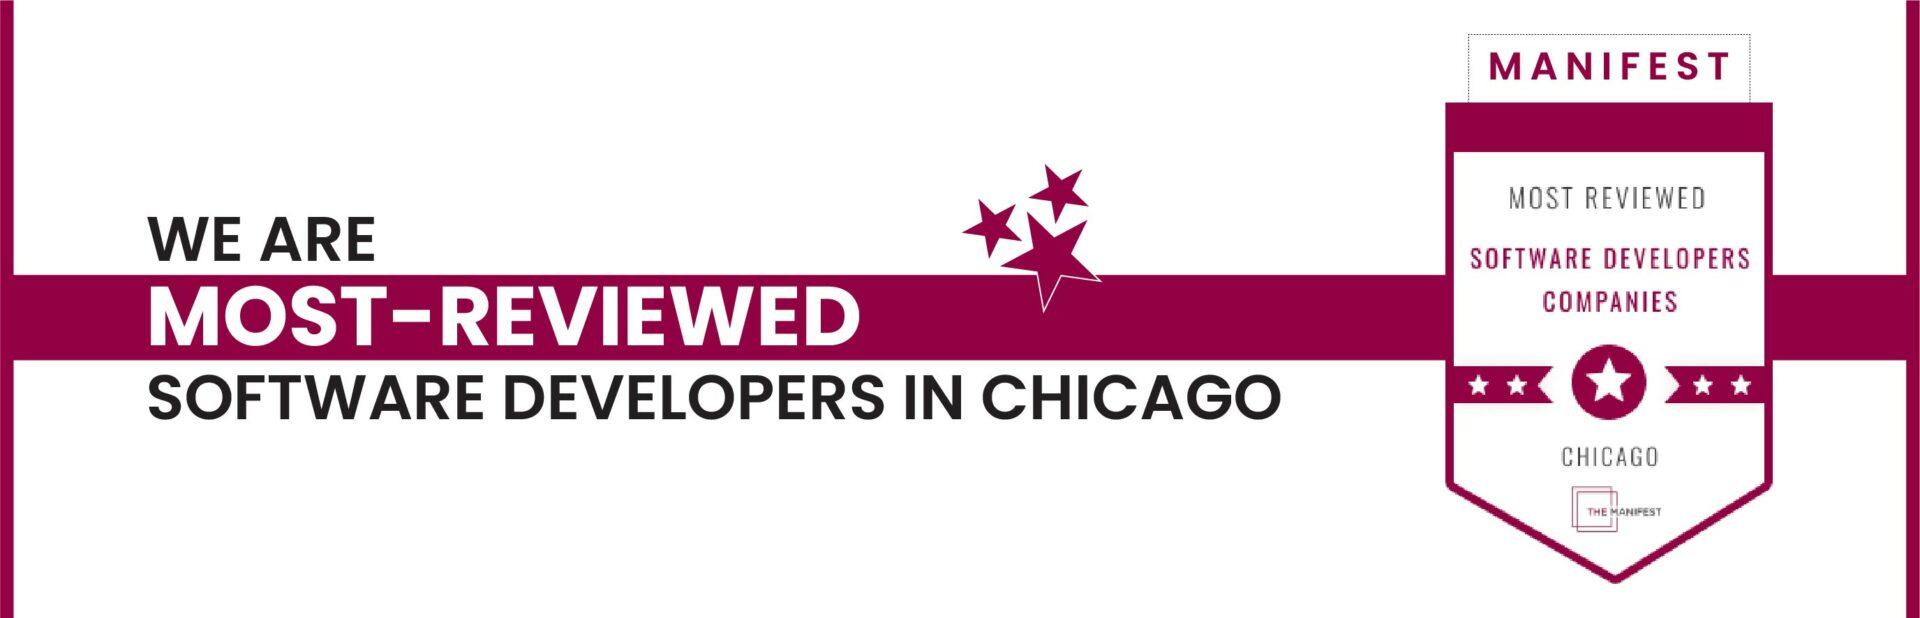 Most-Reviewed Software Developers in Chicago